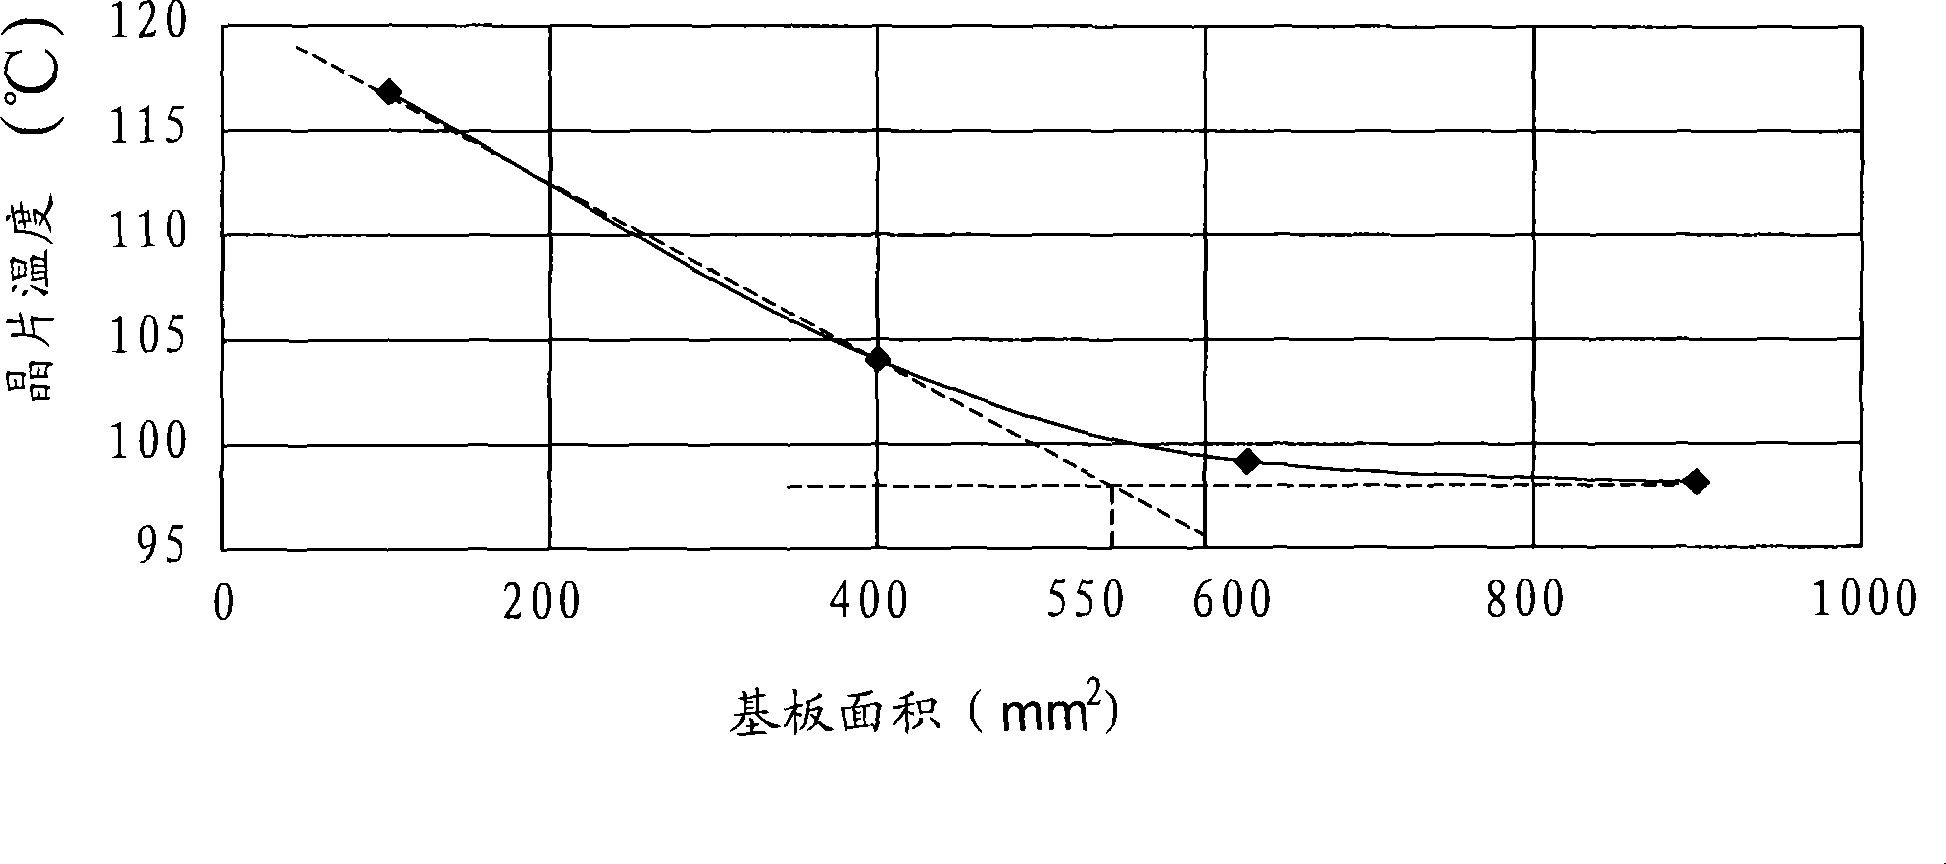 Light emitting diode surface light source device